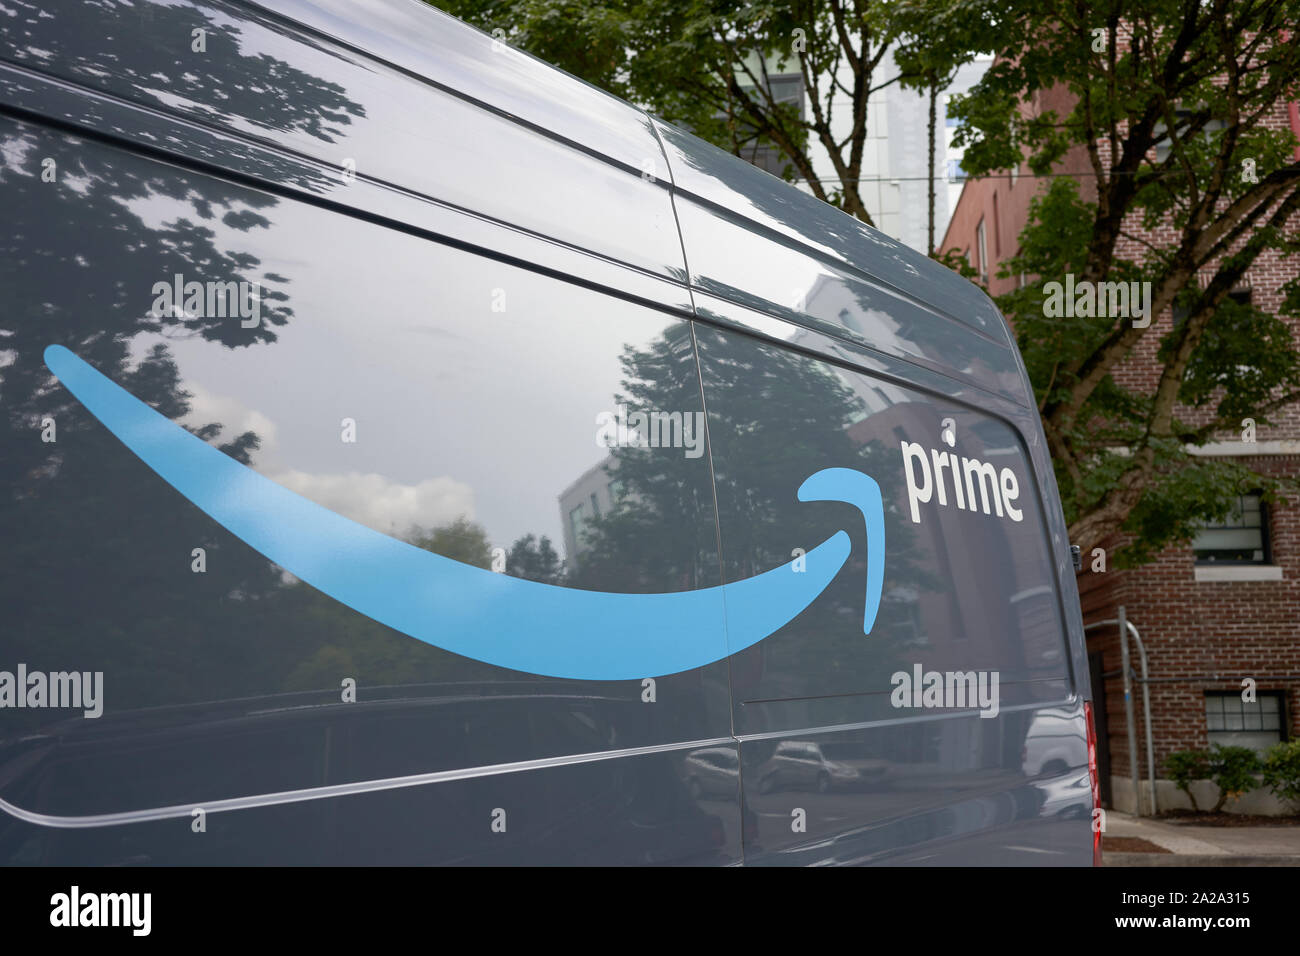 Portland, Oregon, USA - Sep 13, 2019: Closeup of the logo on an Amazon Prime branded van parked on the roadside in downtown Portland. Stock Photo